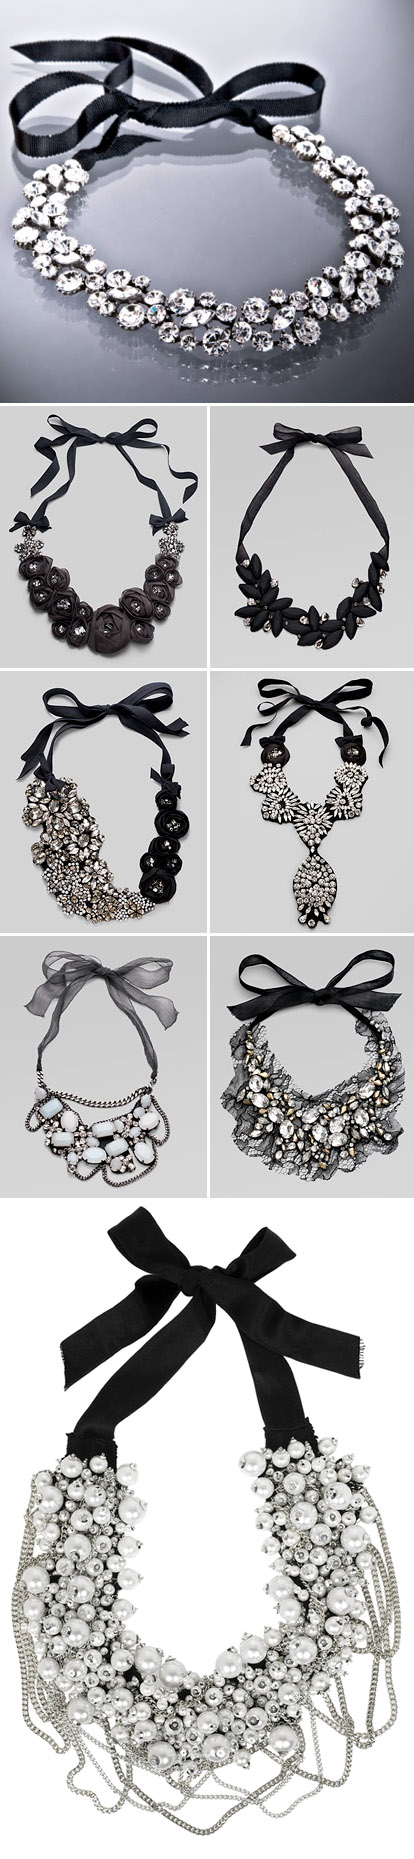 Black and white wedding jewelry and accessories, black ribbon, pearl and crystal bib necklaces